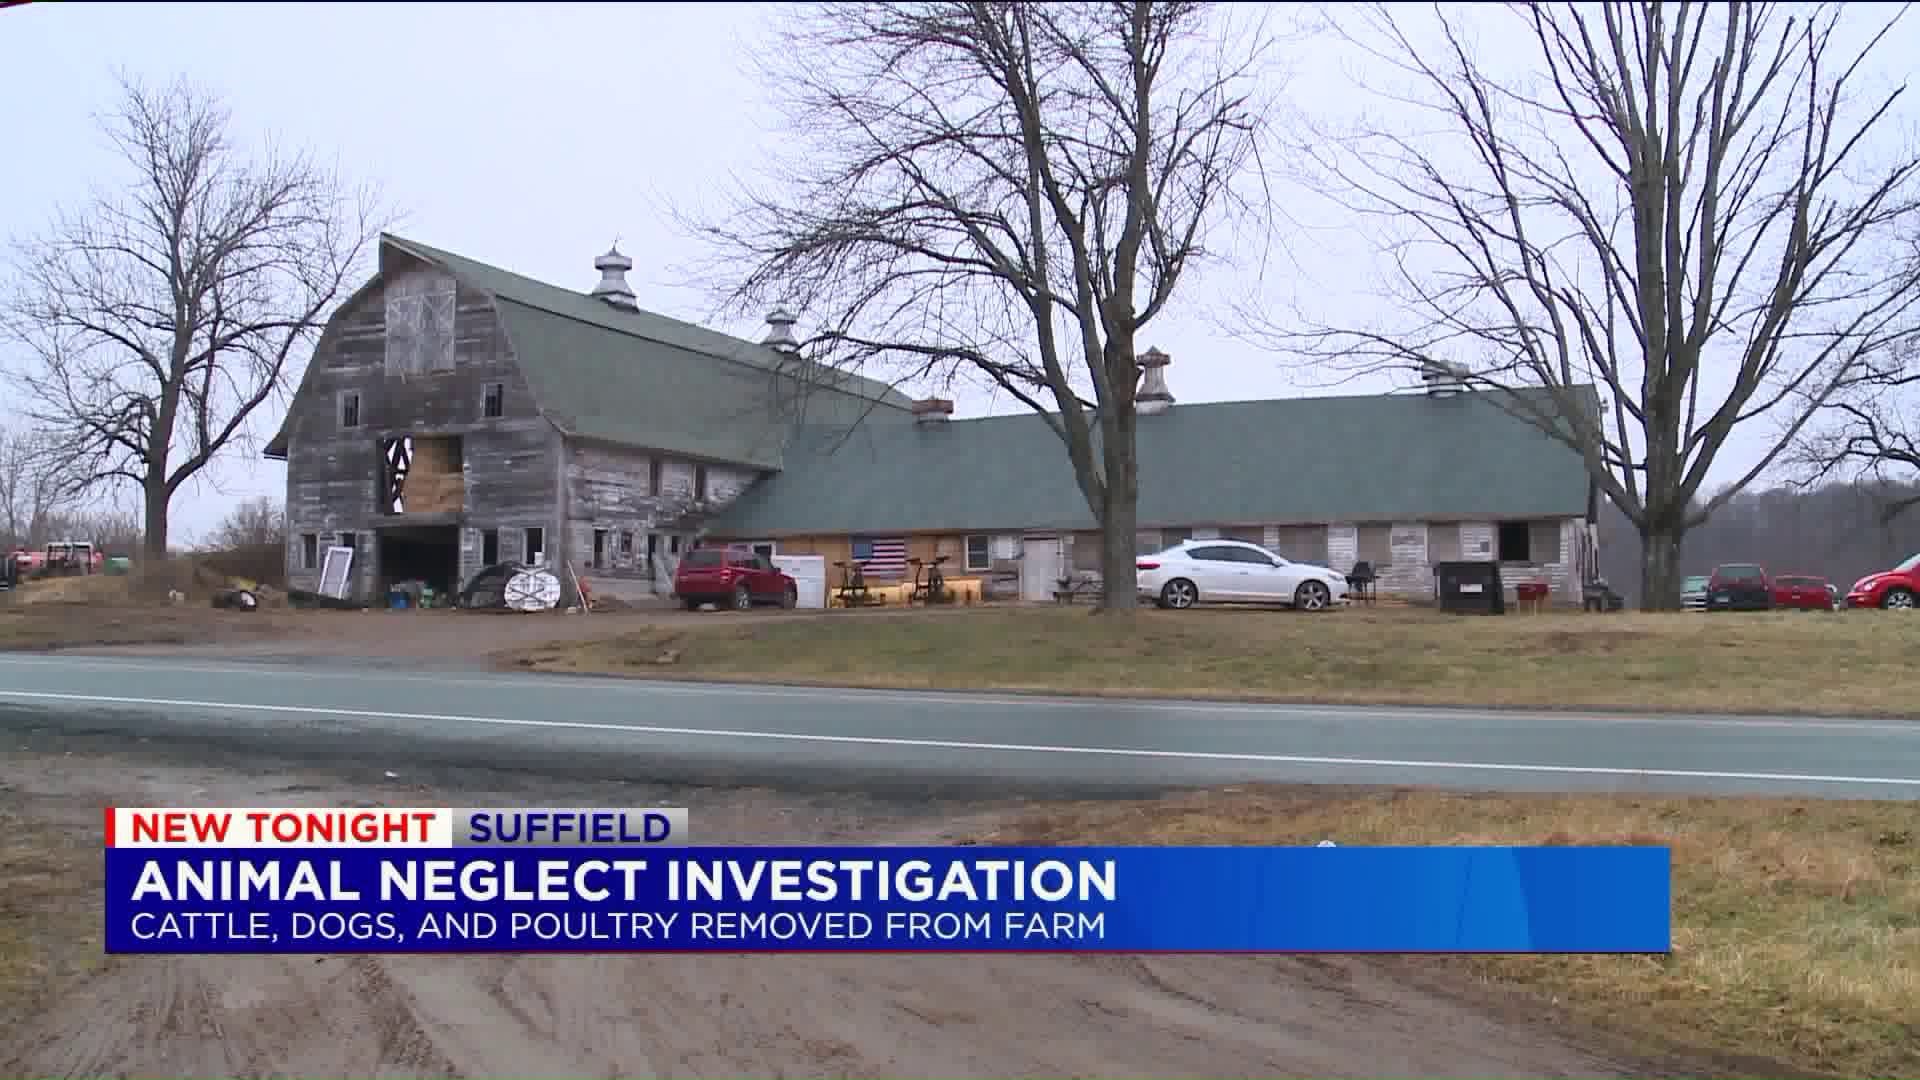 Neglected cattle, dogs, and poultry removed from Suffield farm say police